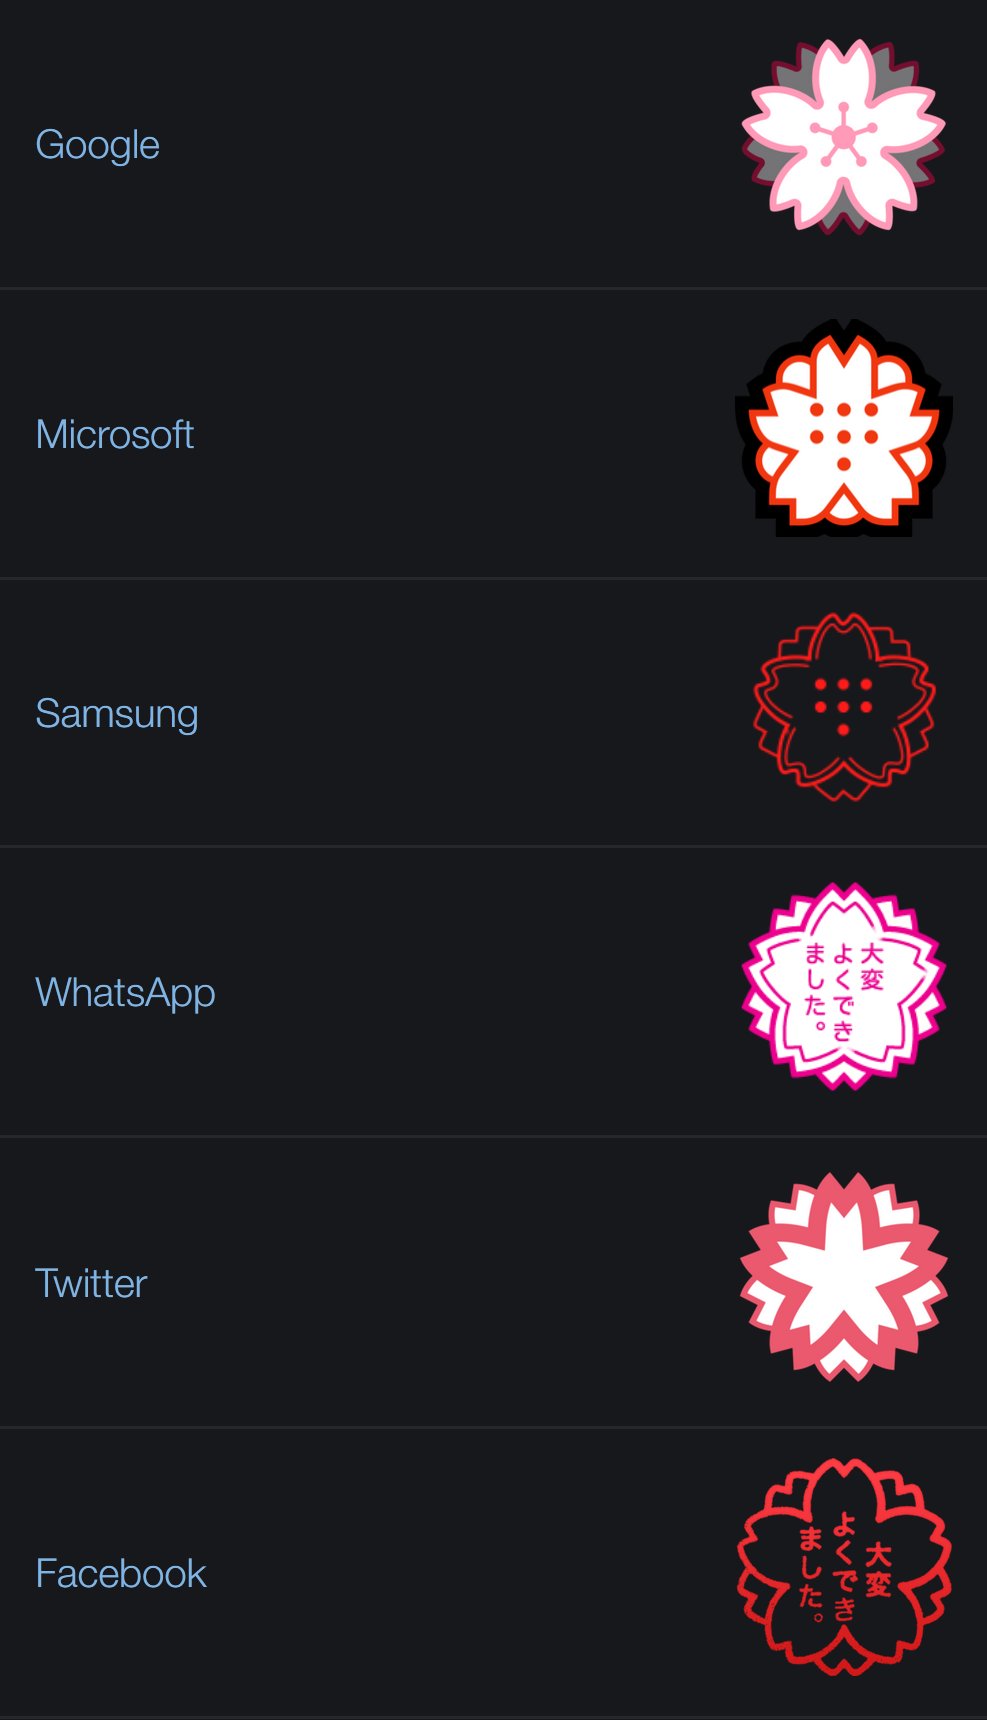 Katelyn Gadd On Twitter Today S Vaguely Depressing Discord Chat Discovery Is How Multiple Different Emoji Sets Like Twemoji Completely Discarded The Semantic Meaning Of Because I Guess Nobody Decided To Figure